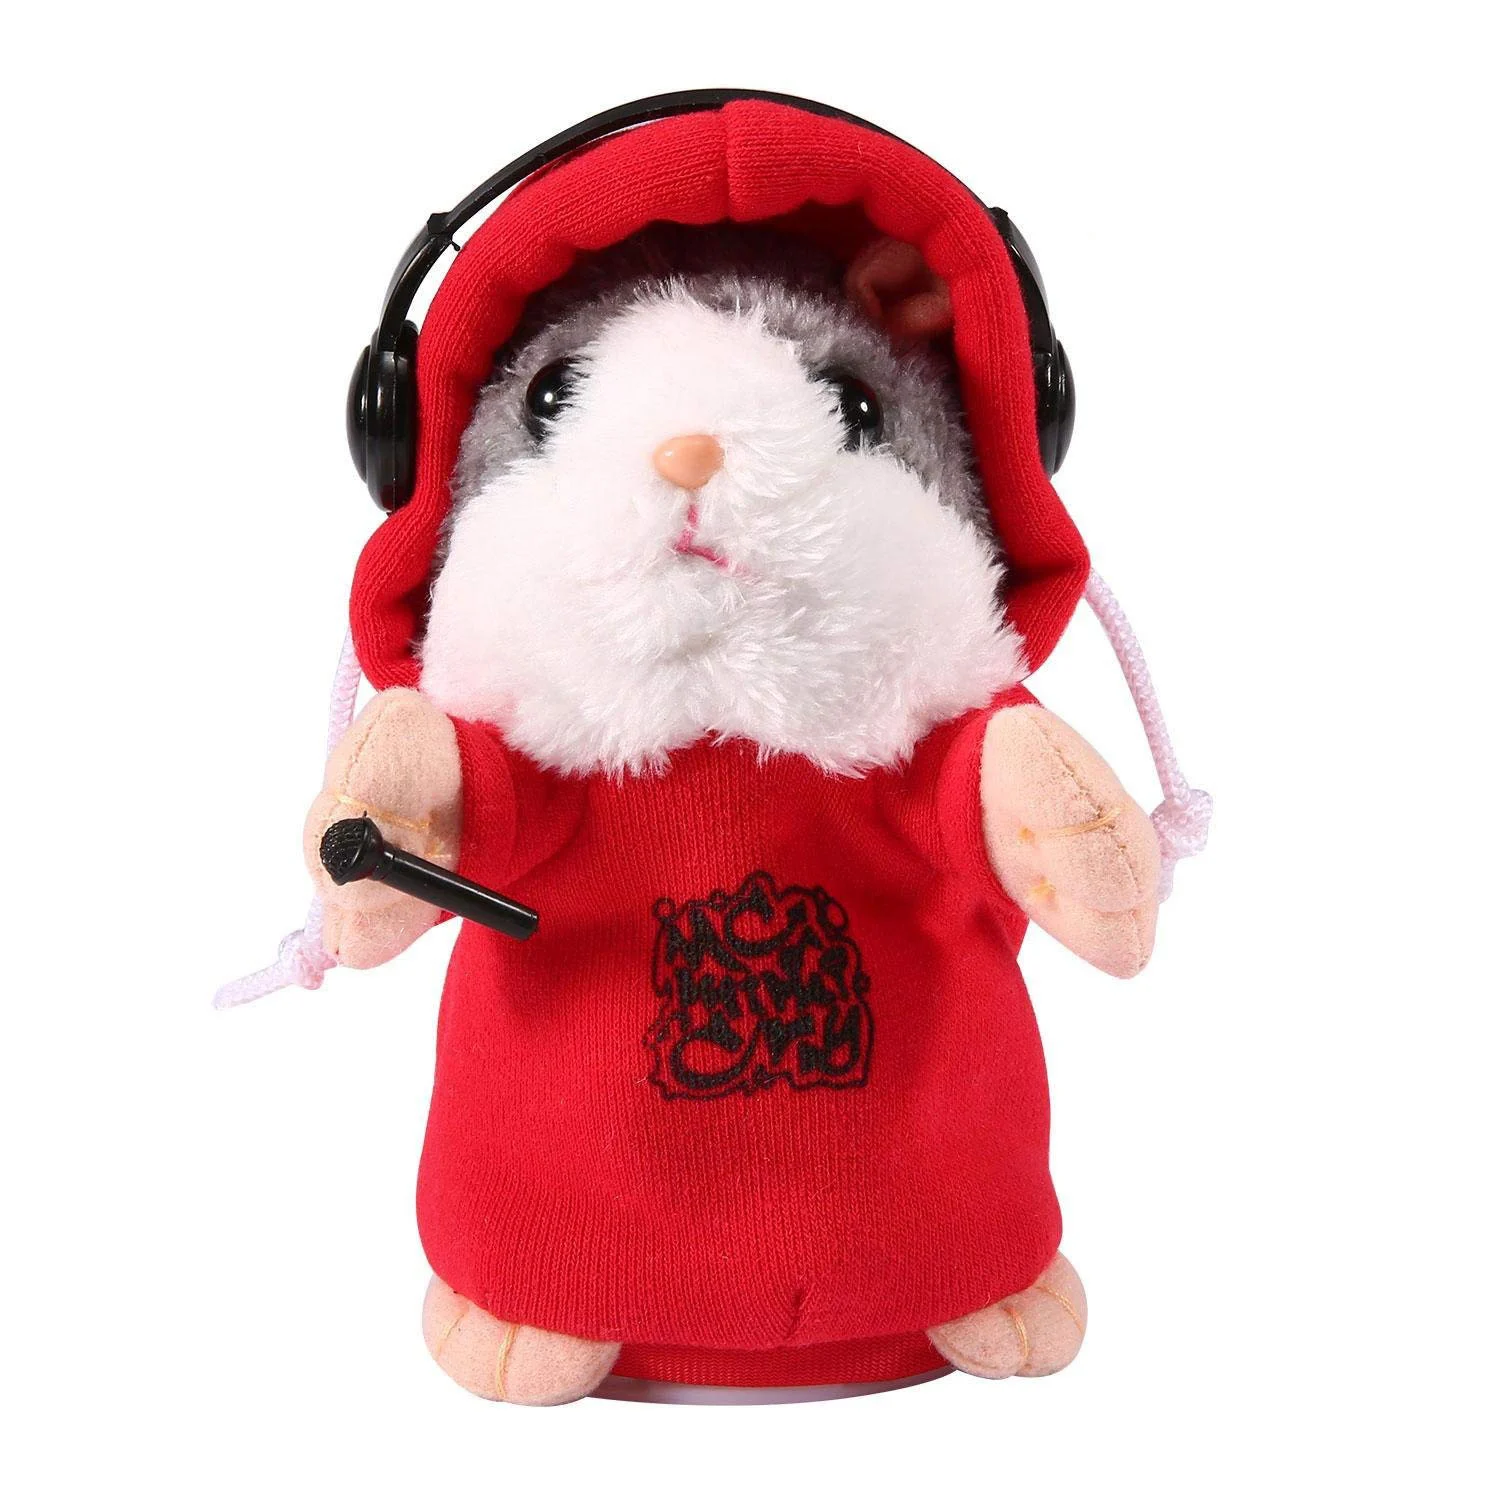 

Lovely DJ Talking Hamster, Mimicry Pet Repeats What You Say Soft Plush Animal with Coat for Children's Birthday Christmas Gift